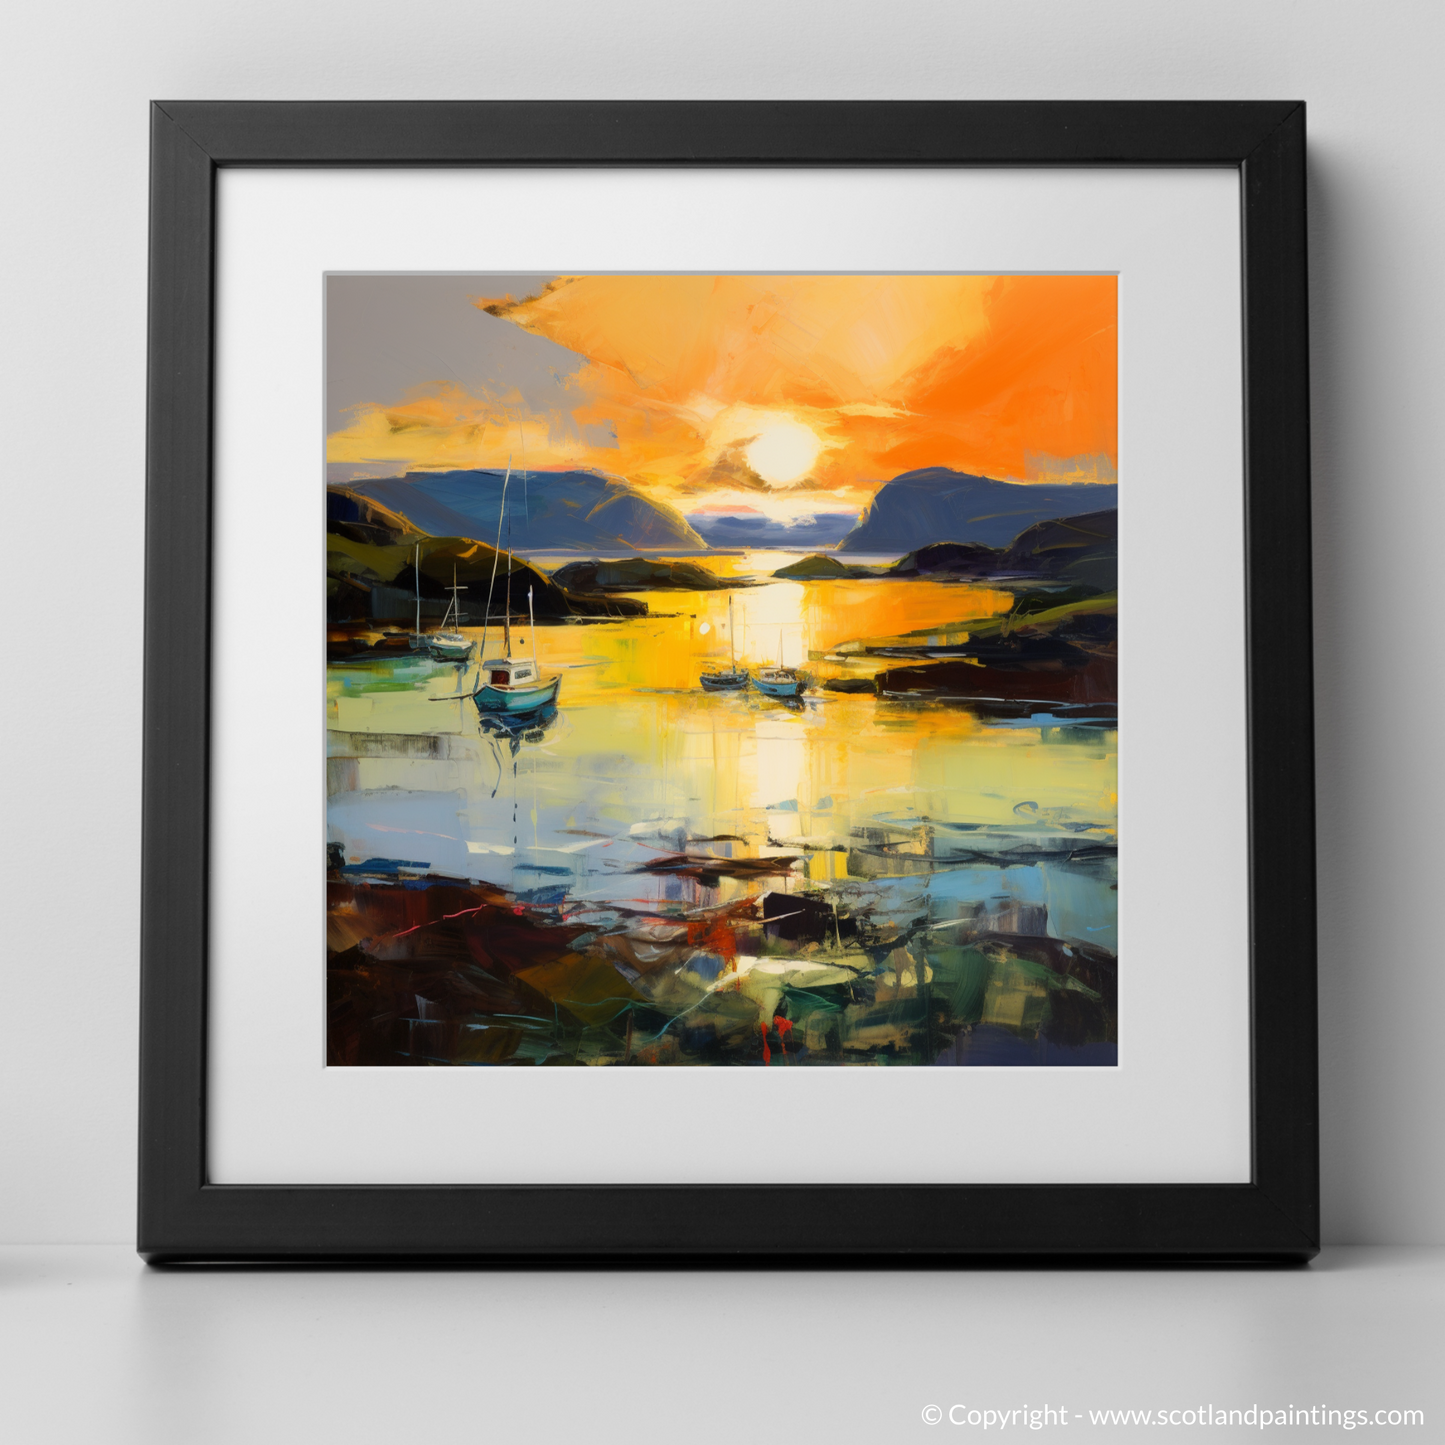 Isleornsay Harbour Sunset: An Abstract Expressionist Odyssey